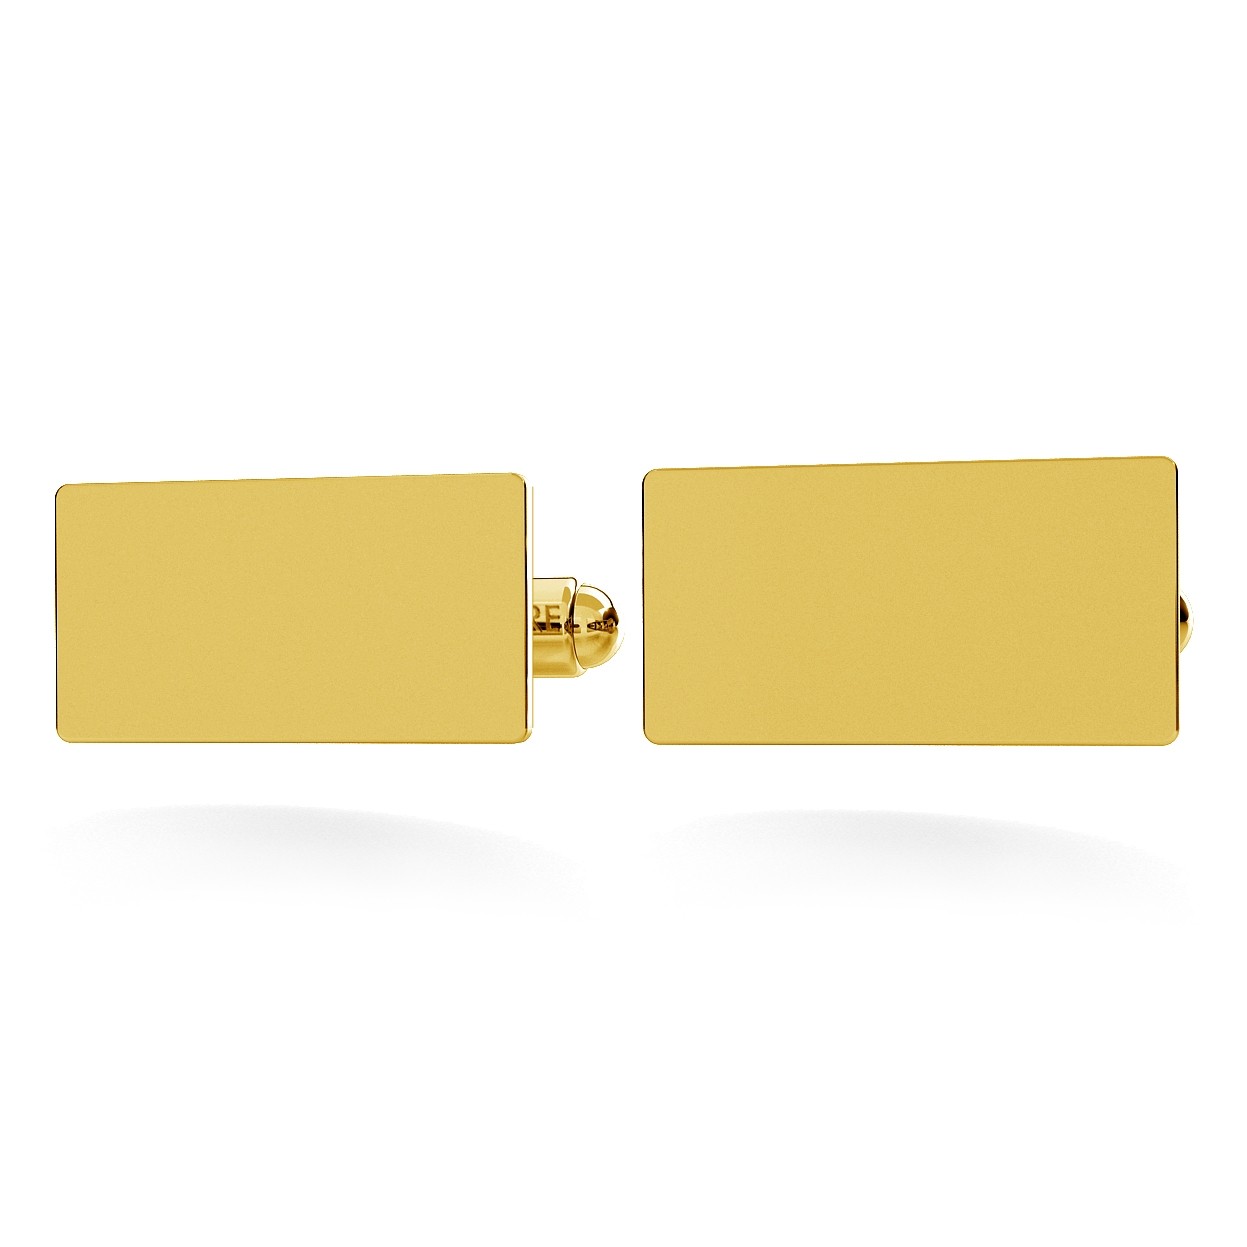 RECTANGLE CUFFLINKS WITH ENGRAVE, SILVER 925, RHODIUM OR GOLD PLATED